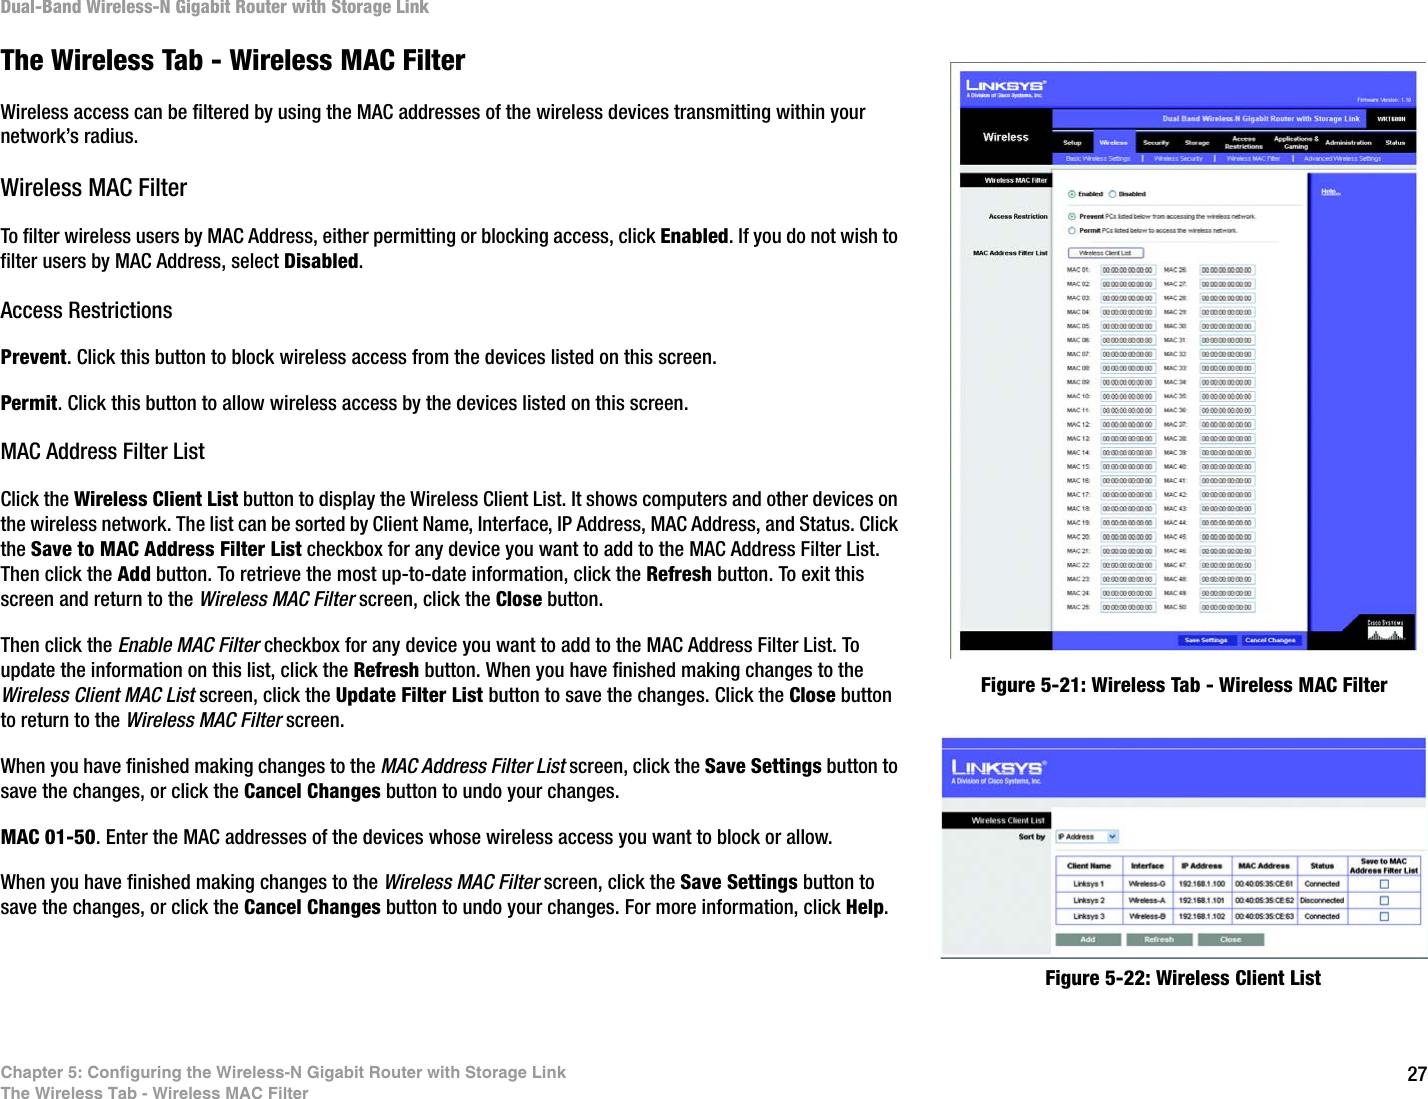 27Chapter 5: Configuring the Wireless-N Gigabit Router with Storage LinkThe Wireless Tab - Wireless MAC FilterDual-Band Wireless-N Gigabit Router with Storage LinkThe Wireless Tab - Wireless MAC FilterWireless access can be filtered by using the MAC addresses of the wireless devices transmitting within your network’s radius.Wireless MAC FilterTo filter wireless users by MAC Address, either permitting or blocking access, click Enabled. If you do not wish to filter users by MAC Address, select Disabled.Access RestrictionsPrevent. Click this button to block wireless access from the devices listed on this screen.Permit. Click this button to allow wireless access by the devices listed on this screen.MAC Address Filter ListClick the Wireless Client List button to display the Wireless Client List. It shows computers and other devices on the wireless network. The list can be sorted by Client Name, Interface, IP Address, MAC Address, and Status. Click the Save to MAC Address Filter List checkbox for any device you want to add to the MAC Address Filter List. Then click the Add button. To retrieve the most up-to-date information, click the Refresh button. To exit this screen and return to the Wireless MAC Filter screen, click the Close button.Then click the Enable MAC Filter checkbox for any device you want to add to the MAC Address Filter List. To update the information on this list, click the Refresh button. When you have finished making changes to the Wireless Client MAC List screen, click the Update Filter List button to save the changes. Click the Close button to return to the Wireless MAC Filter screen.When you have finished making changes to the MAC Address Filter List screen, click the Save Settings button to save the changes, or click the Cancel Changes button to undo your changes. MAC 01-50. Enter the MAC addresses of the devices whose wireless access you want to block or allow.When you have finished making changes to the Wireless MAC Filter screen, click the Save Settings button to save the changes, or click the Cancel Changes button to undo your changes. For more information, click Help.Figure 5-21: Wireless Tab - Wireless MAC FilterFigure 5-22: Wireless Client List